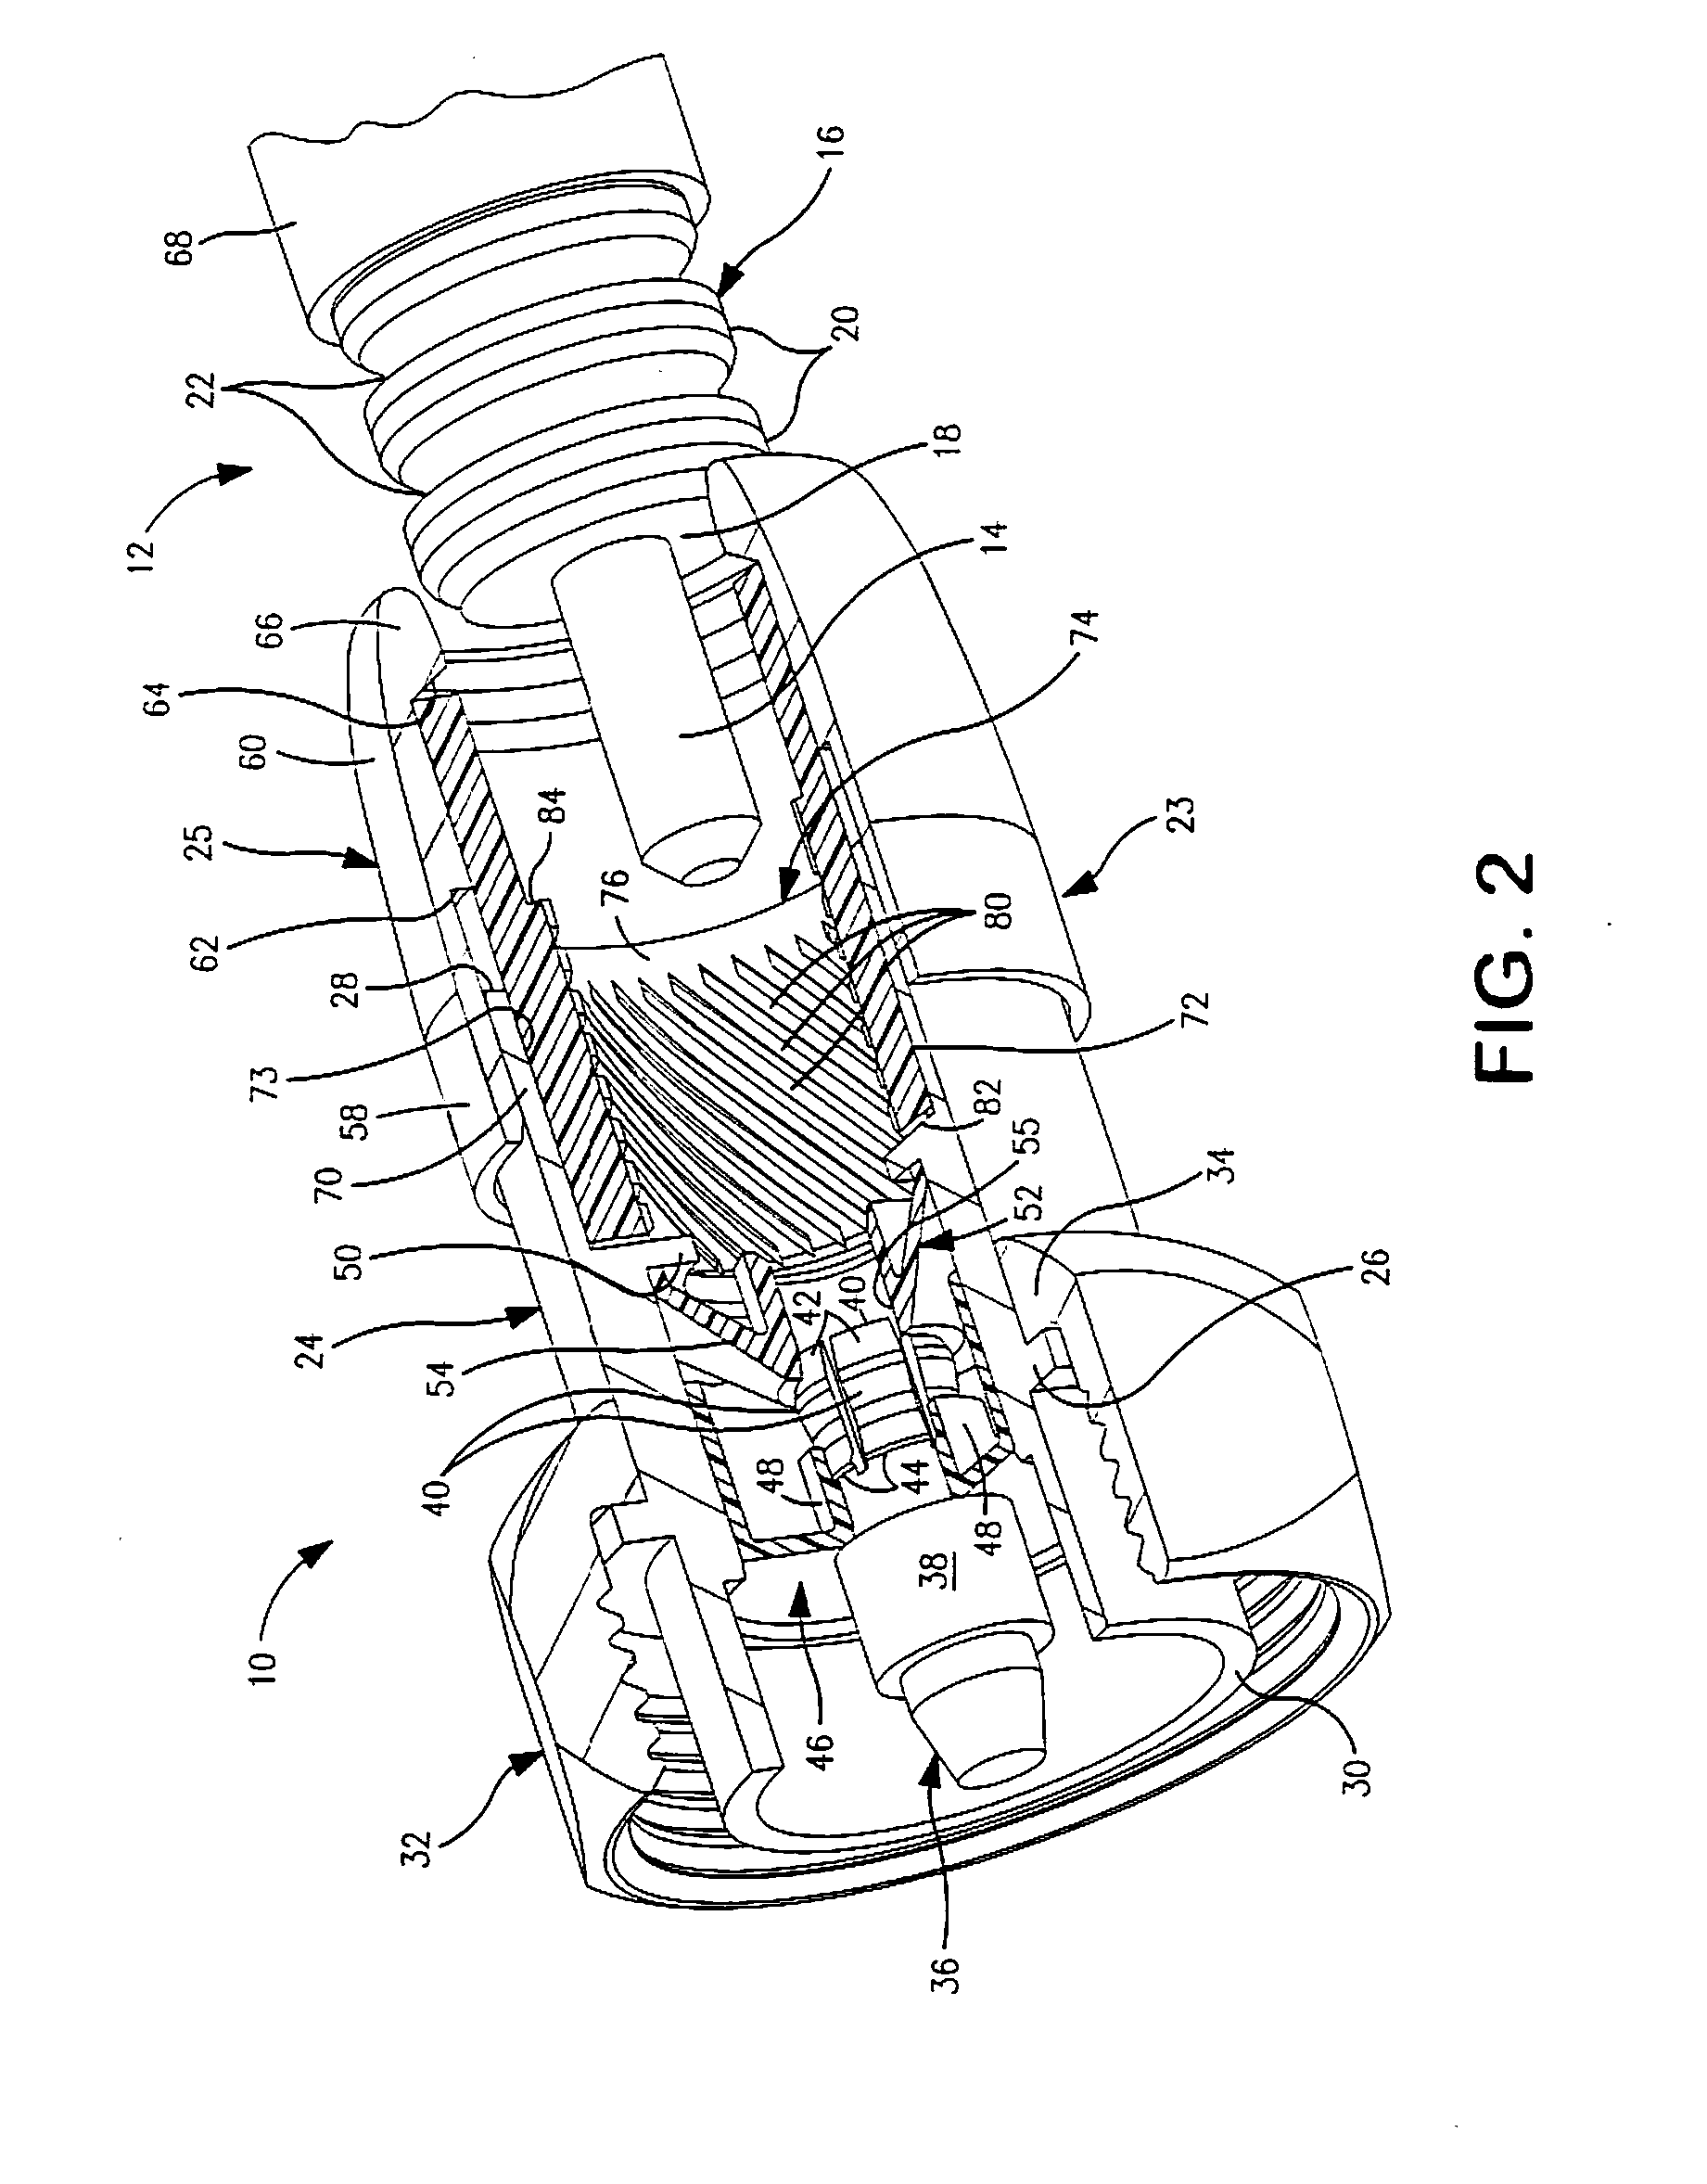 Connector for coaxial cable and method